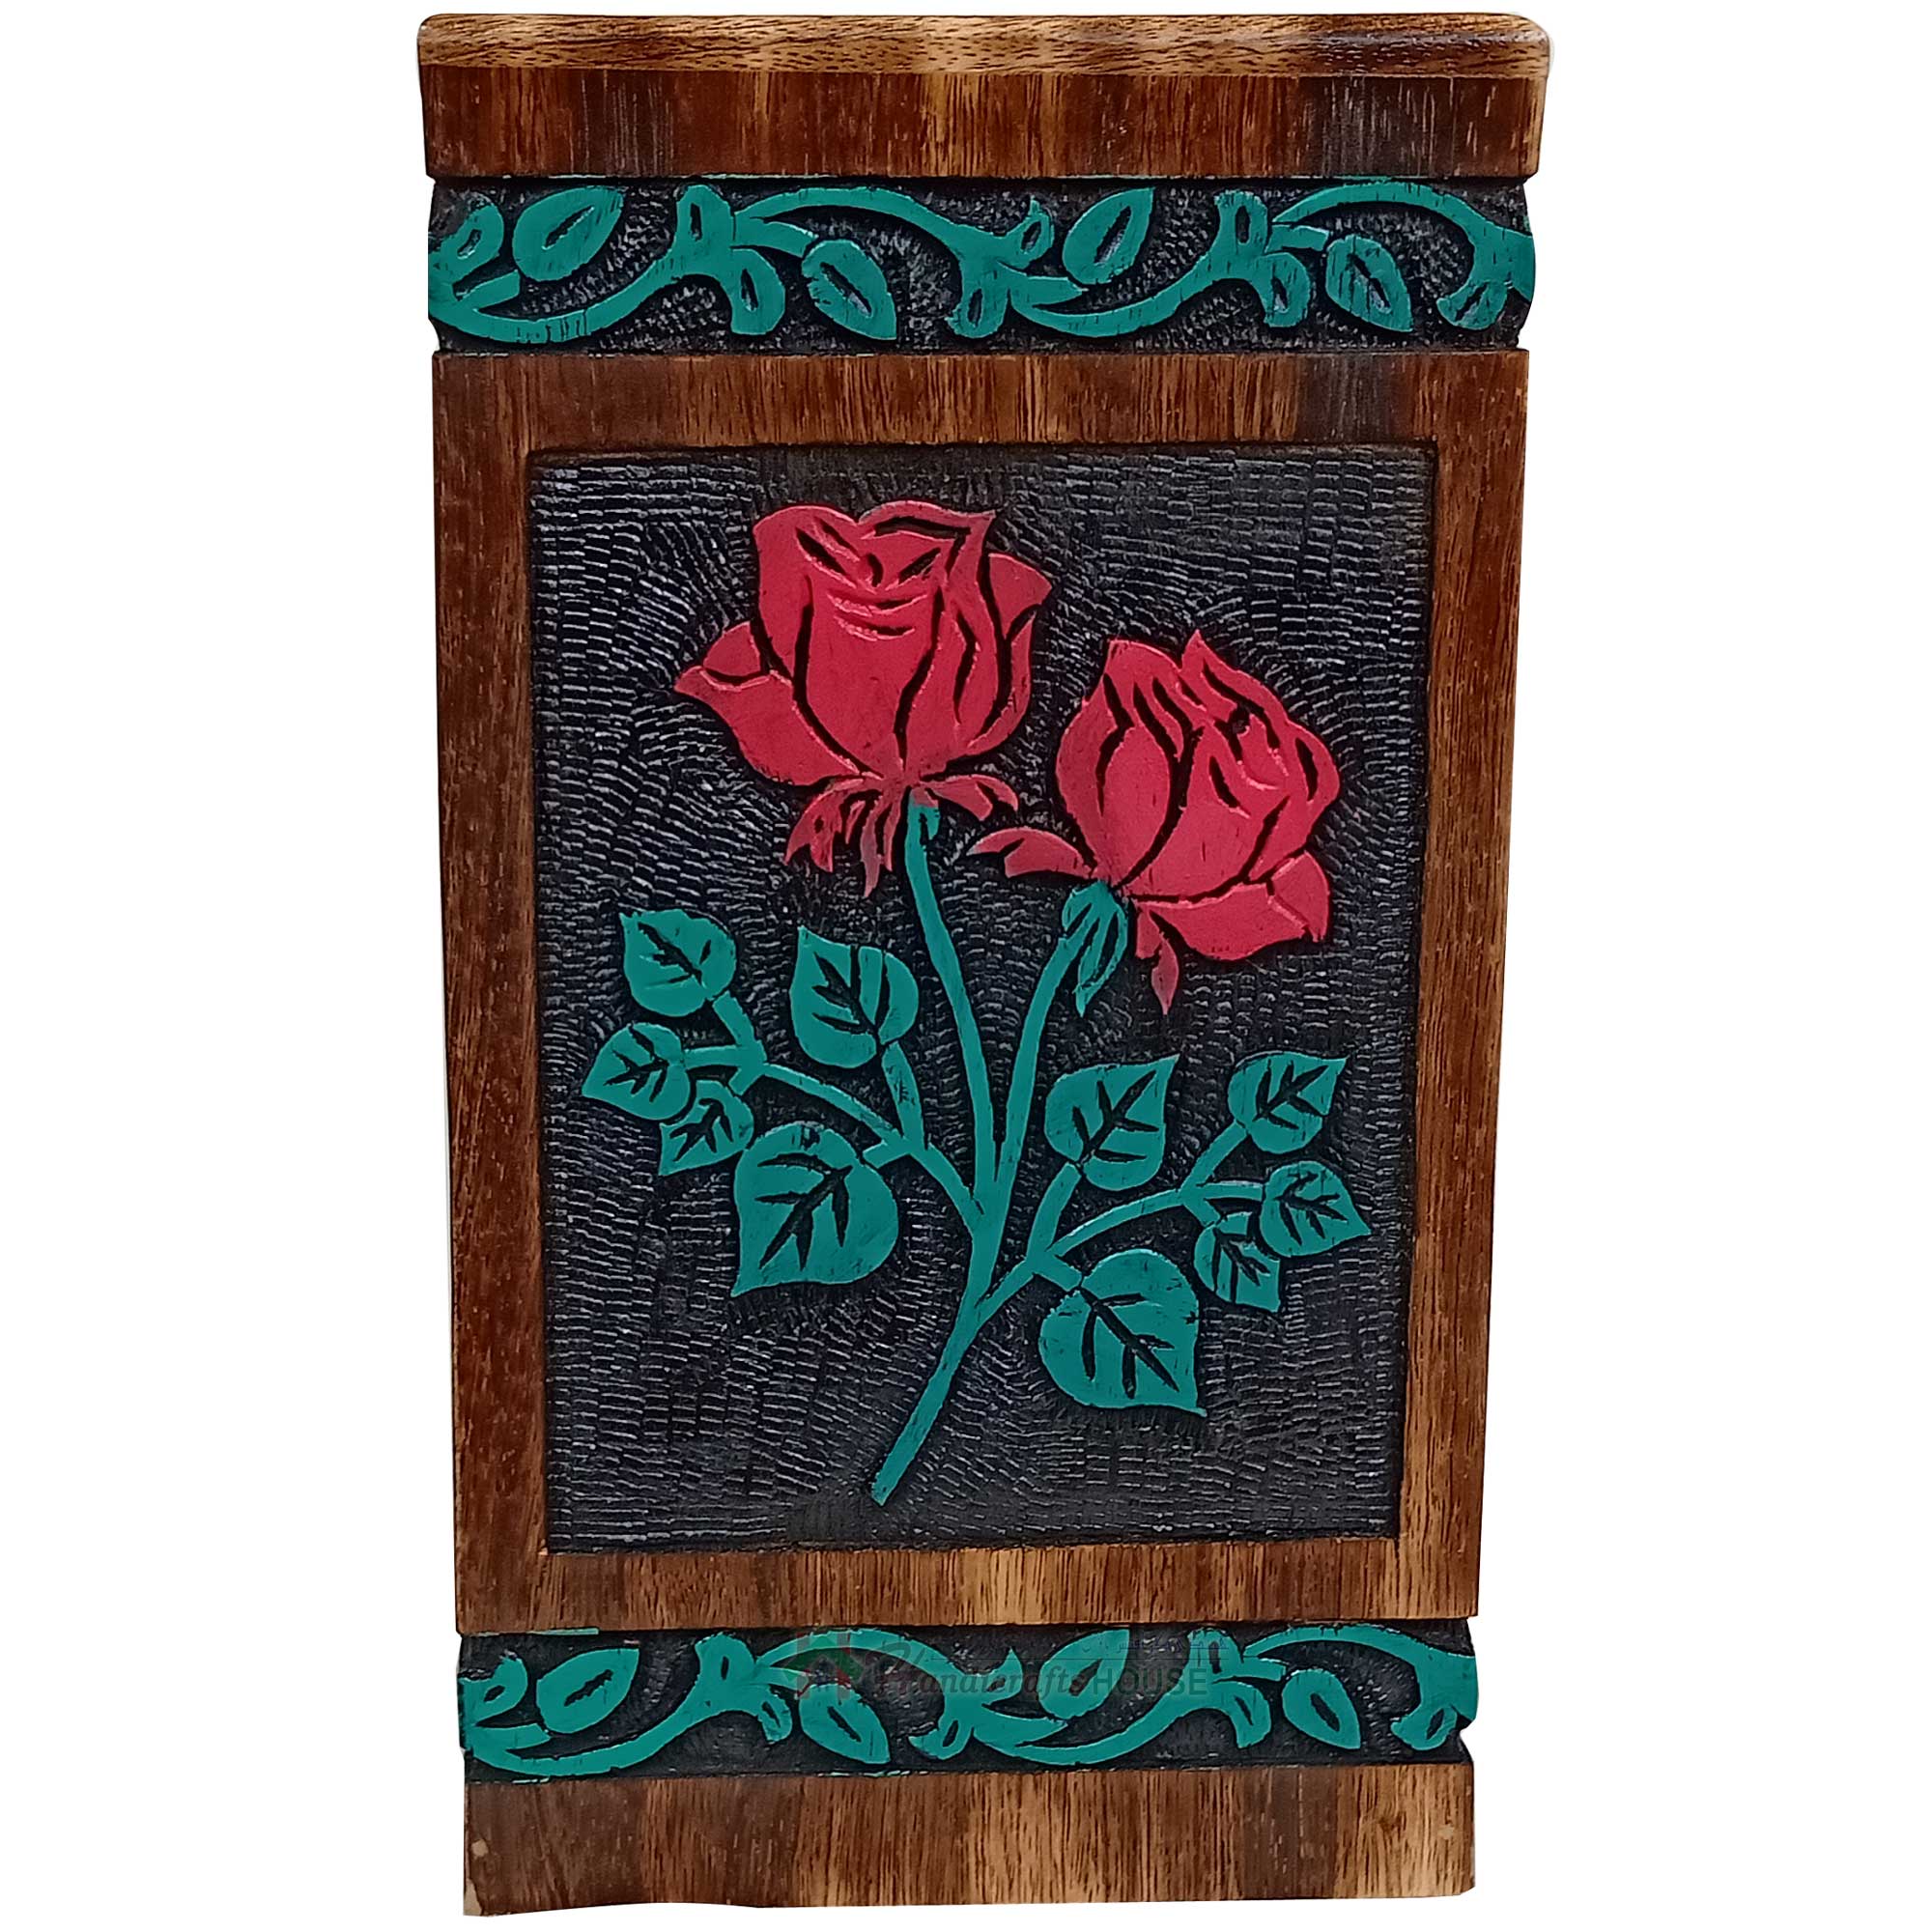 Hand Engraving Rose Flower Display Burial at Home or in Niche at Columbarium Cremation Urn for Human Ashes Adult Large Wood Decorative Urn Funeral Urn for Mother/Dad DABEETU Urns for Wooden